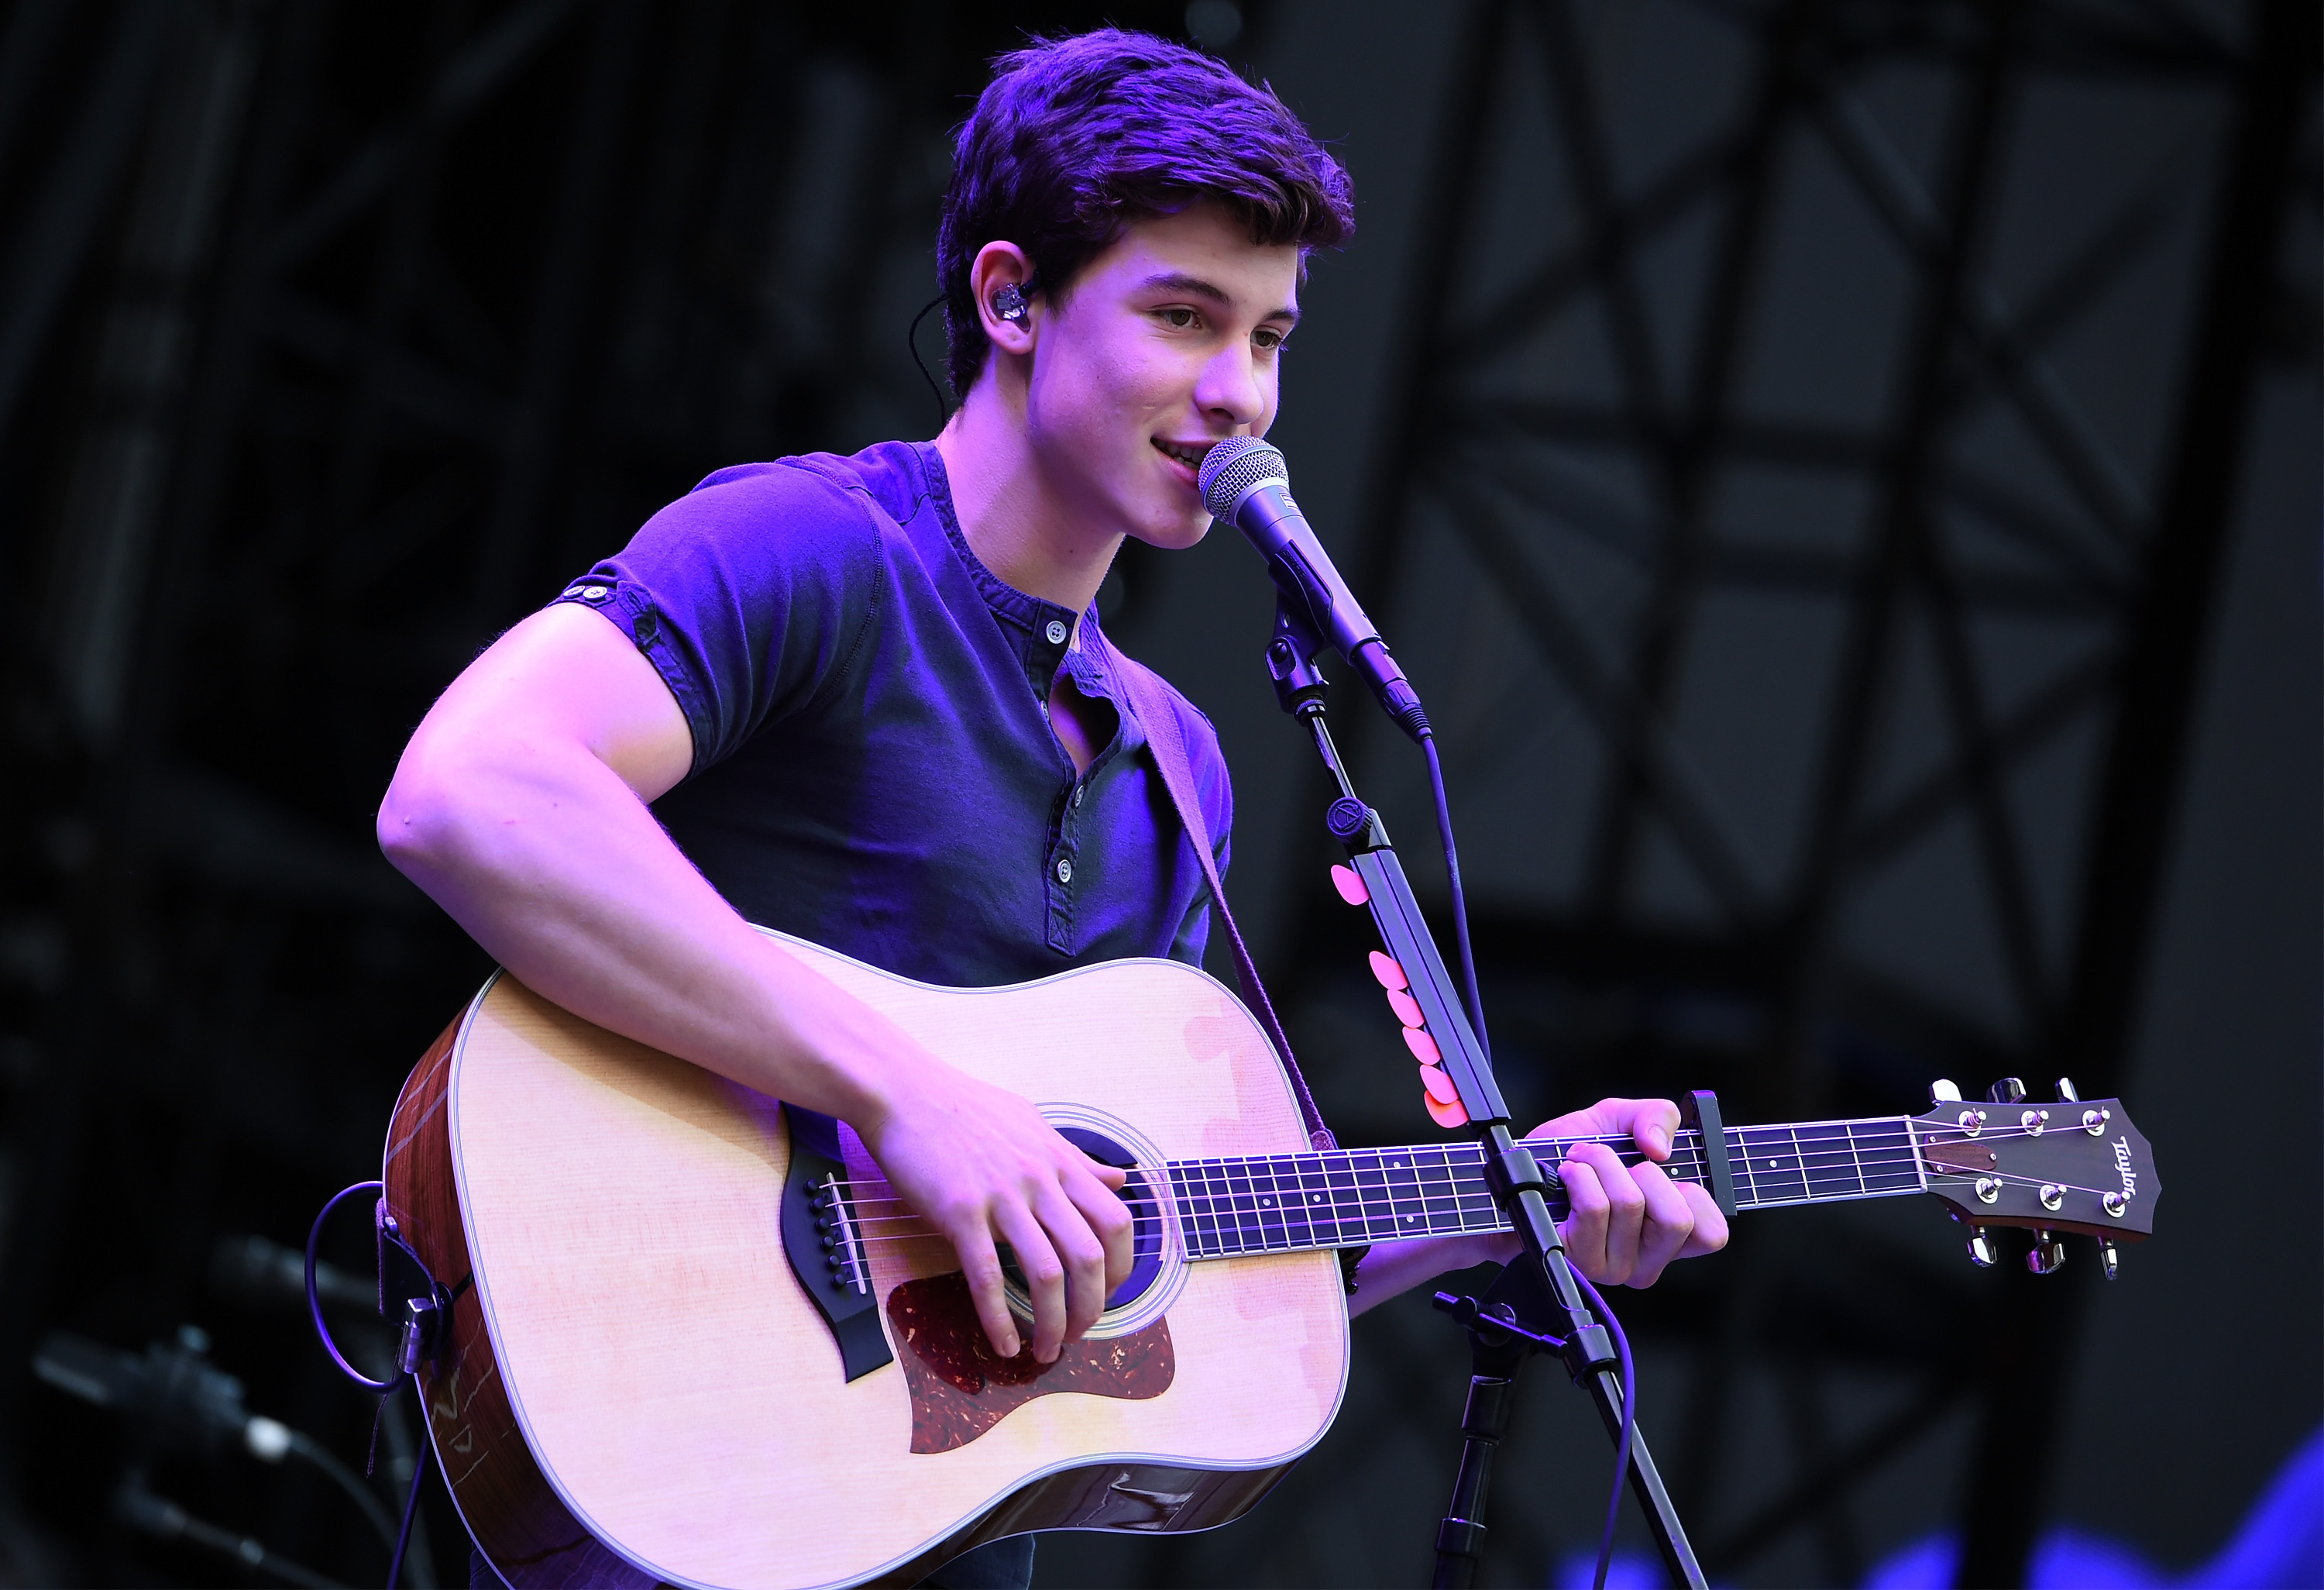 Awesome Shawn Mendes Wallpaper - Shawn Mendes Wallpaper Laptop , HD Wallpaper & Backgrounds